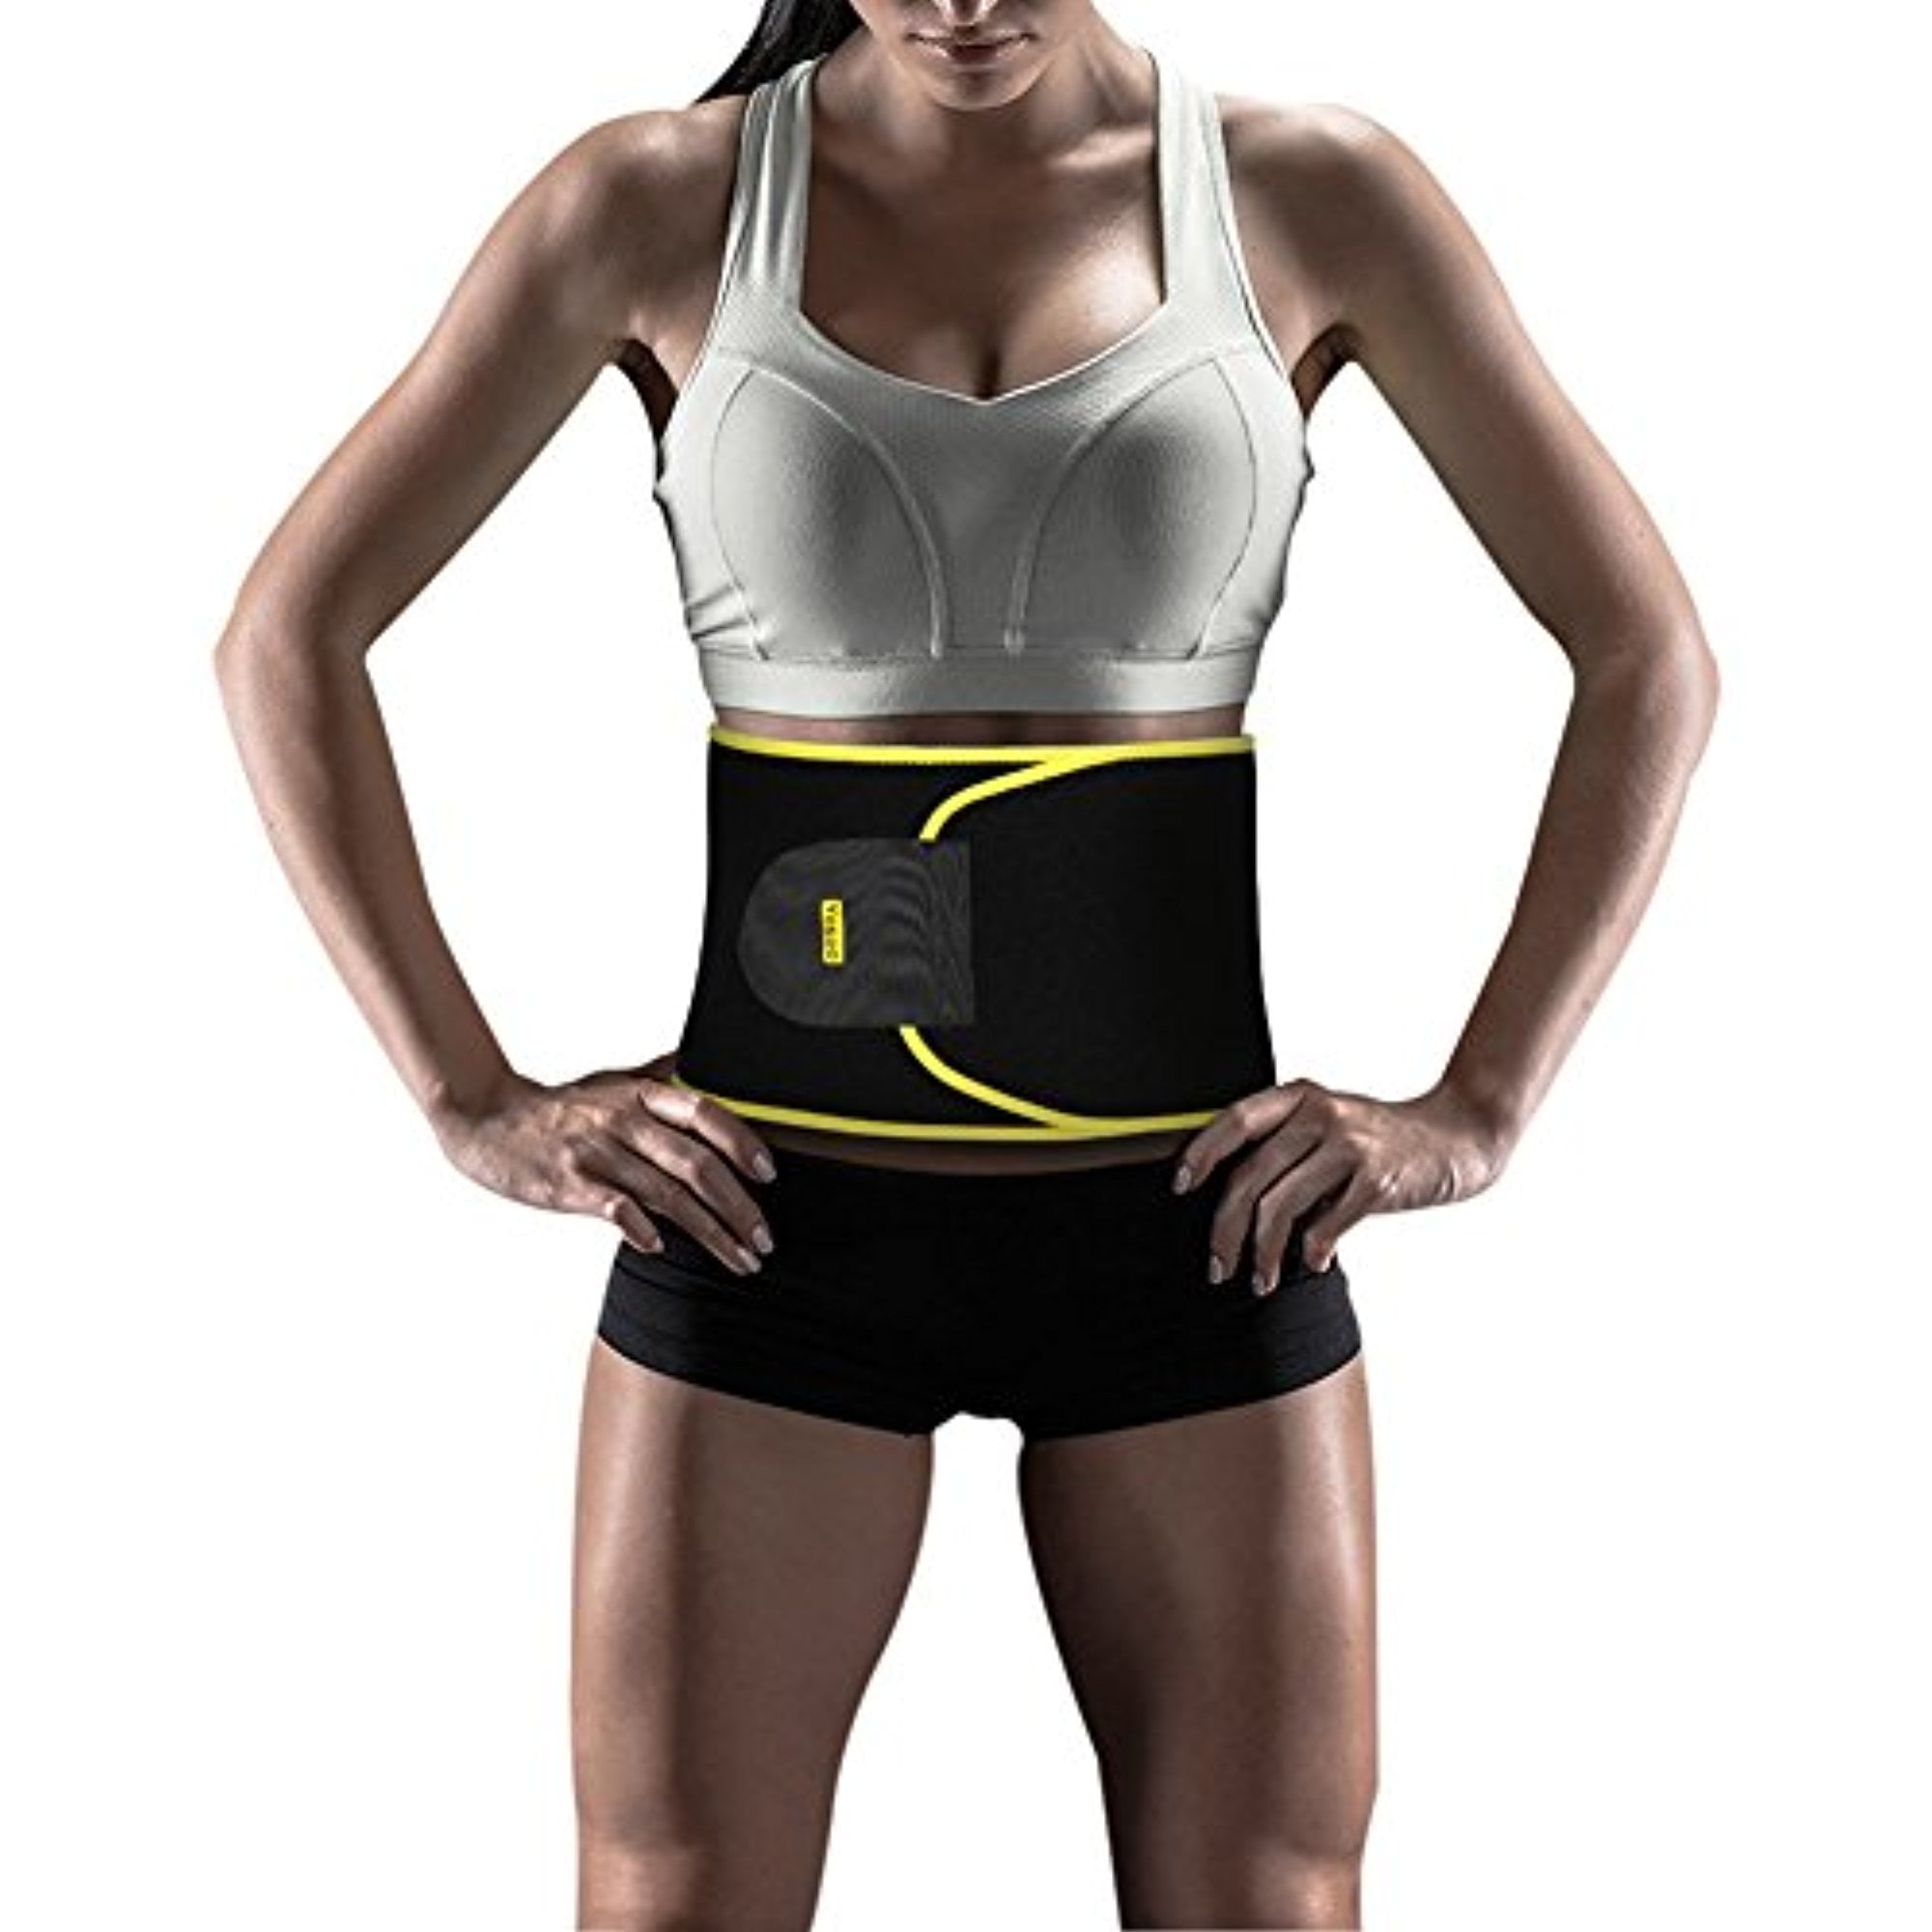 CCTYCC Waist Trimmer Belt,Non-Slip,chloroprene Rubber Abdominal Trainer,Soft Comfortable,for Sweat Wrap,Low Back and Lumbar Support with Sauna Suit Effect